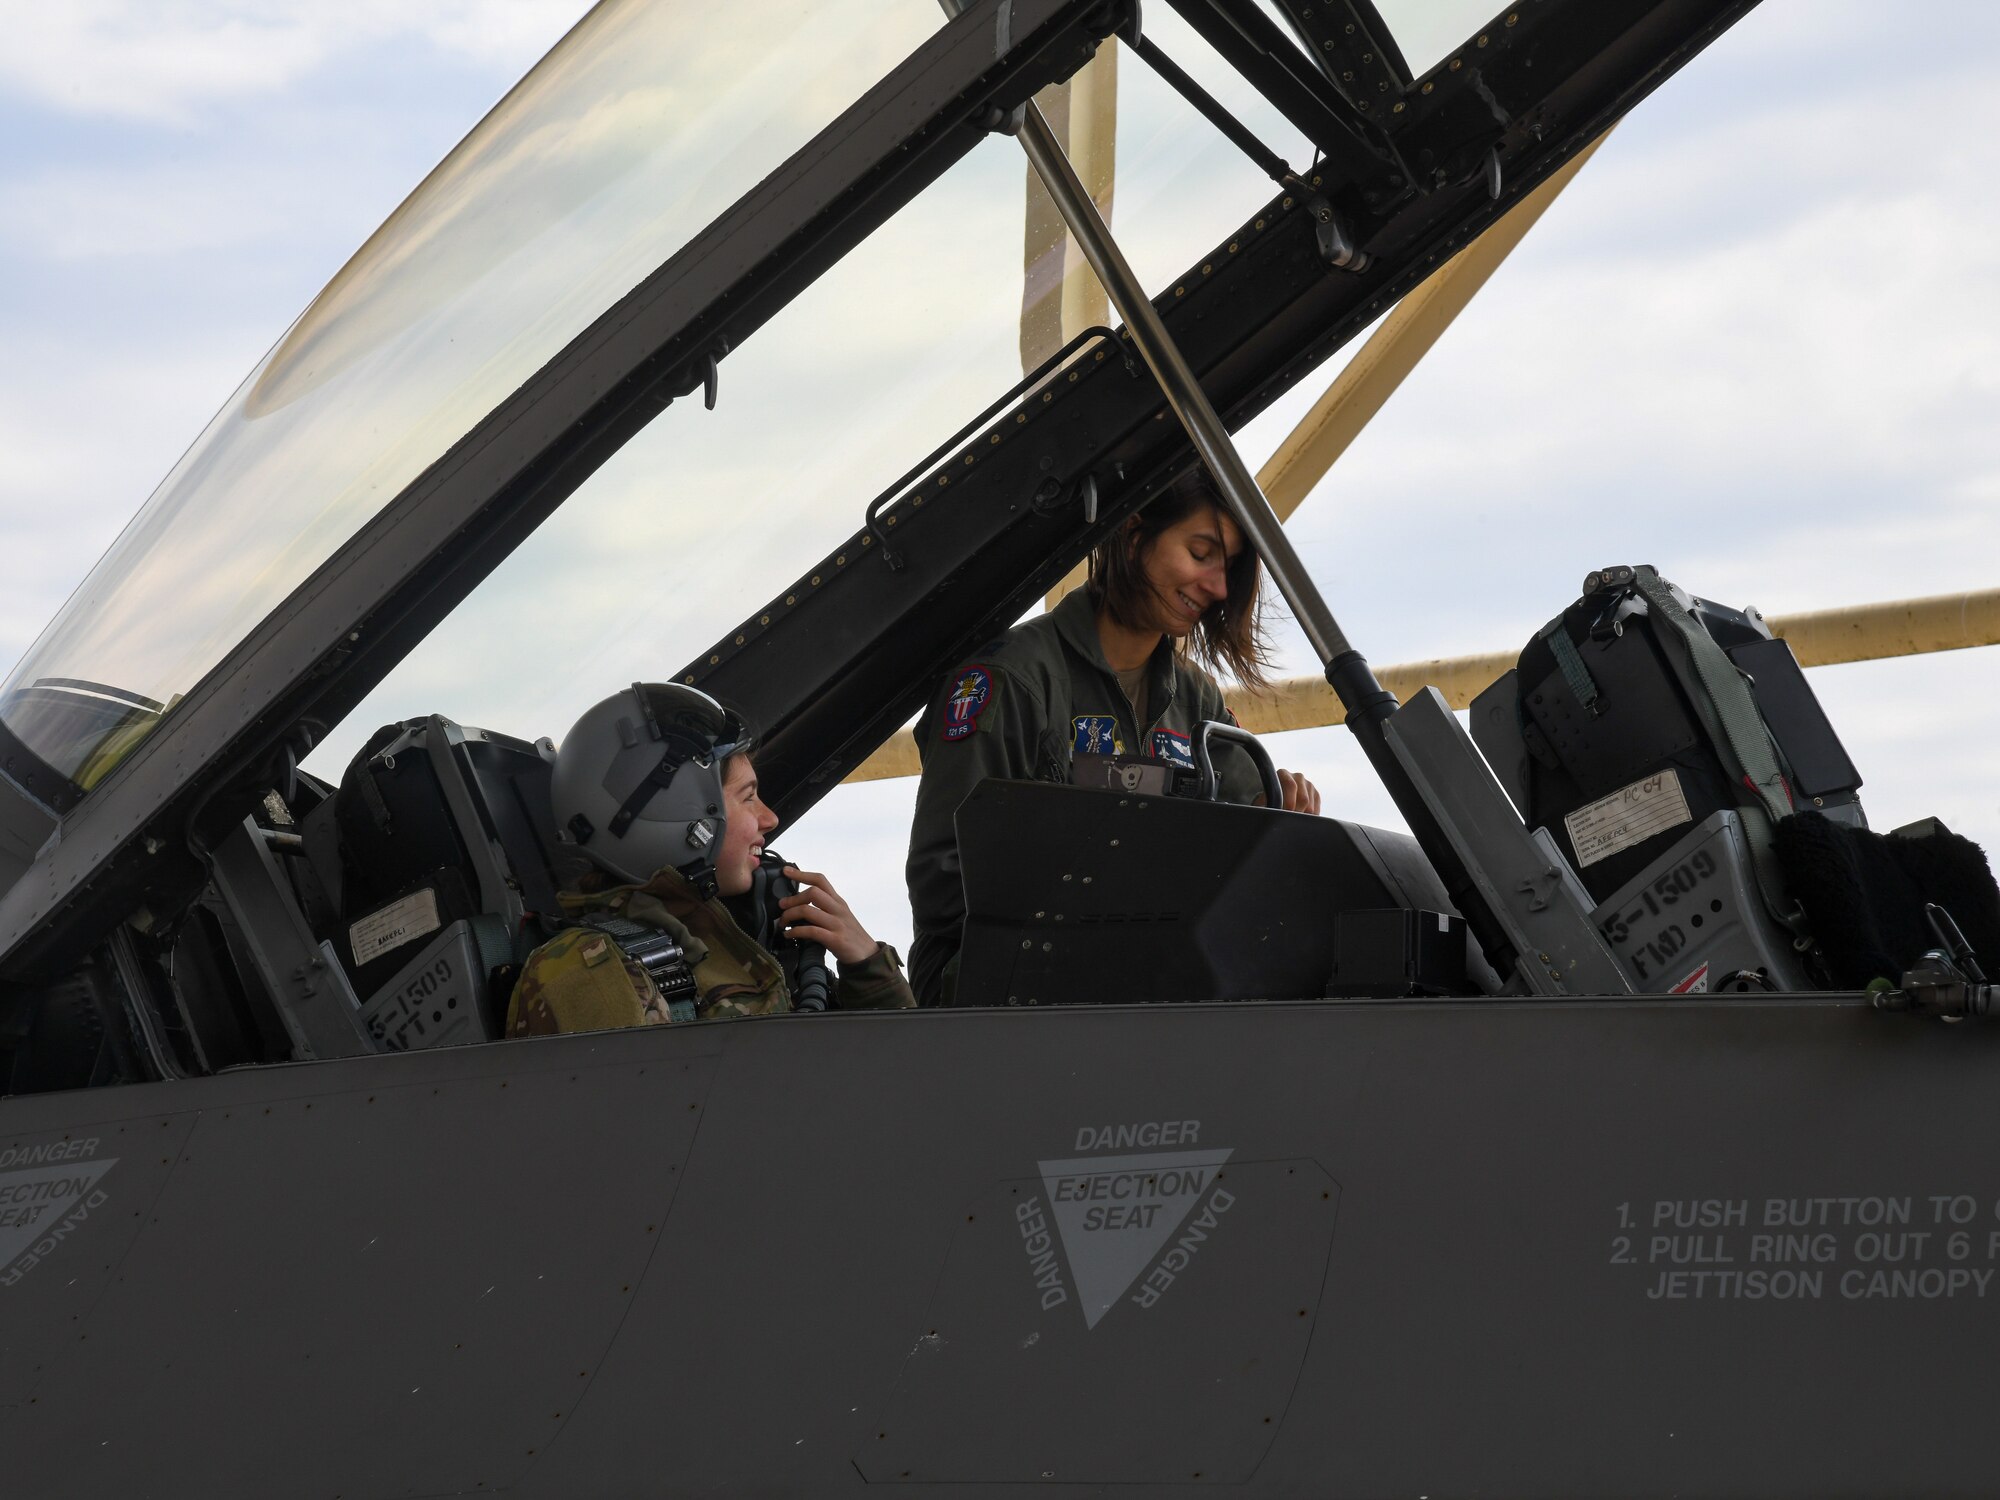 Cadets from the Georgetown University Army ROTC program, also known as the Hoya Battalion, visited Joint Base Andrews, March 30, 2022. They were fitted for flight equipment and flew in the backseat of F-16s from the 113th Wing, D.C. Air National Guard.